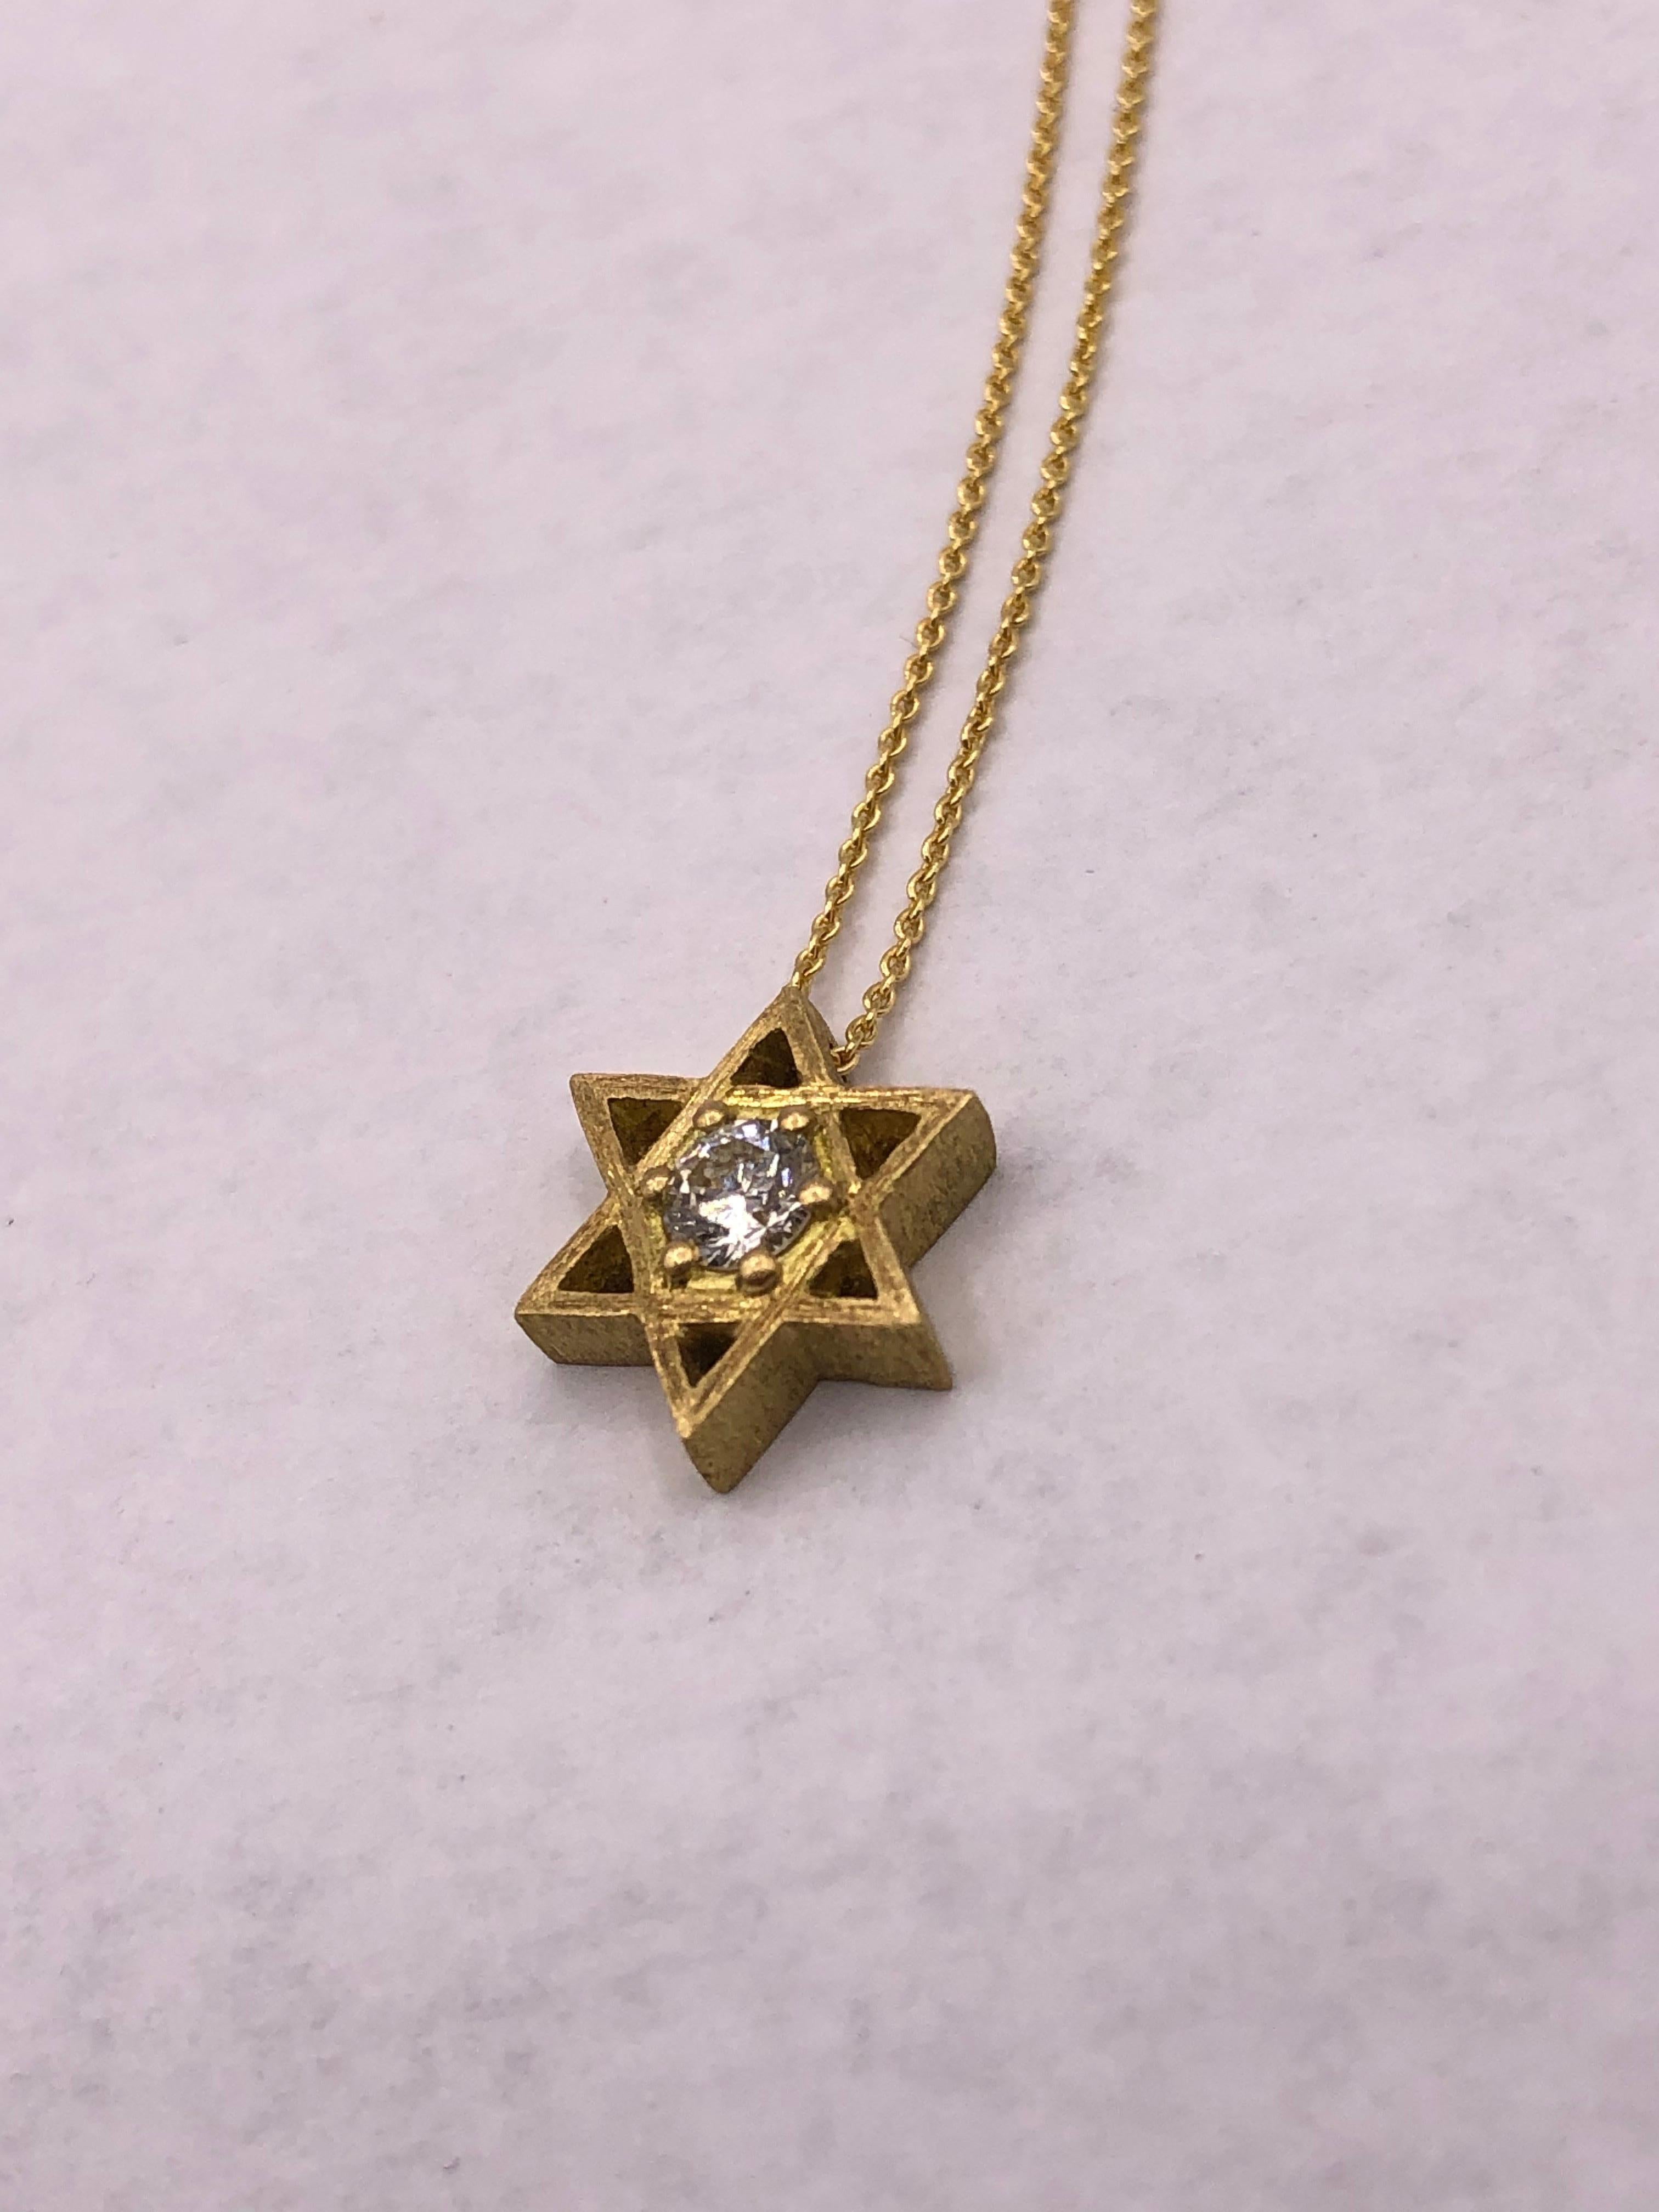 Beautiful dainty and yet weighty Star of David pendant necklace. A gorgeous 3.5mm white diamond center stone. Sits nicely below clavicle.

The Star of David was hand carved from wax and cast in 18k gold then hand etched to give a silky texture and